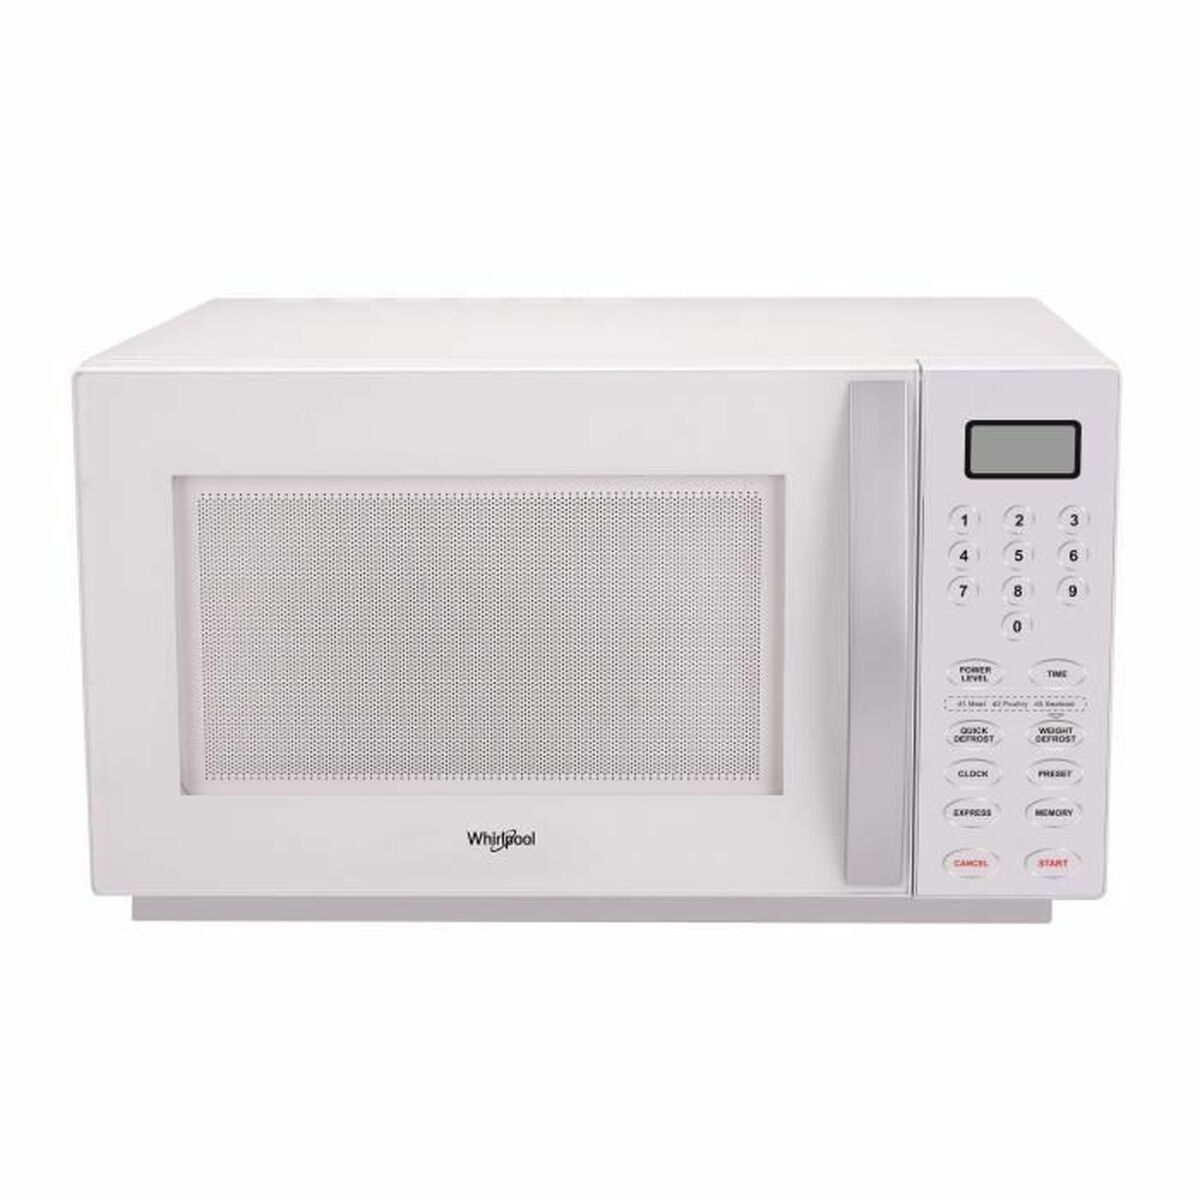 Four Micro-ondes Whirlpool Corporation 850 W Blanc 30 L